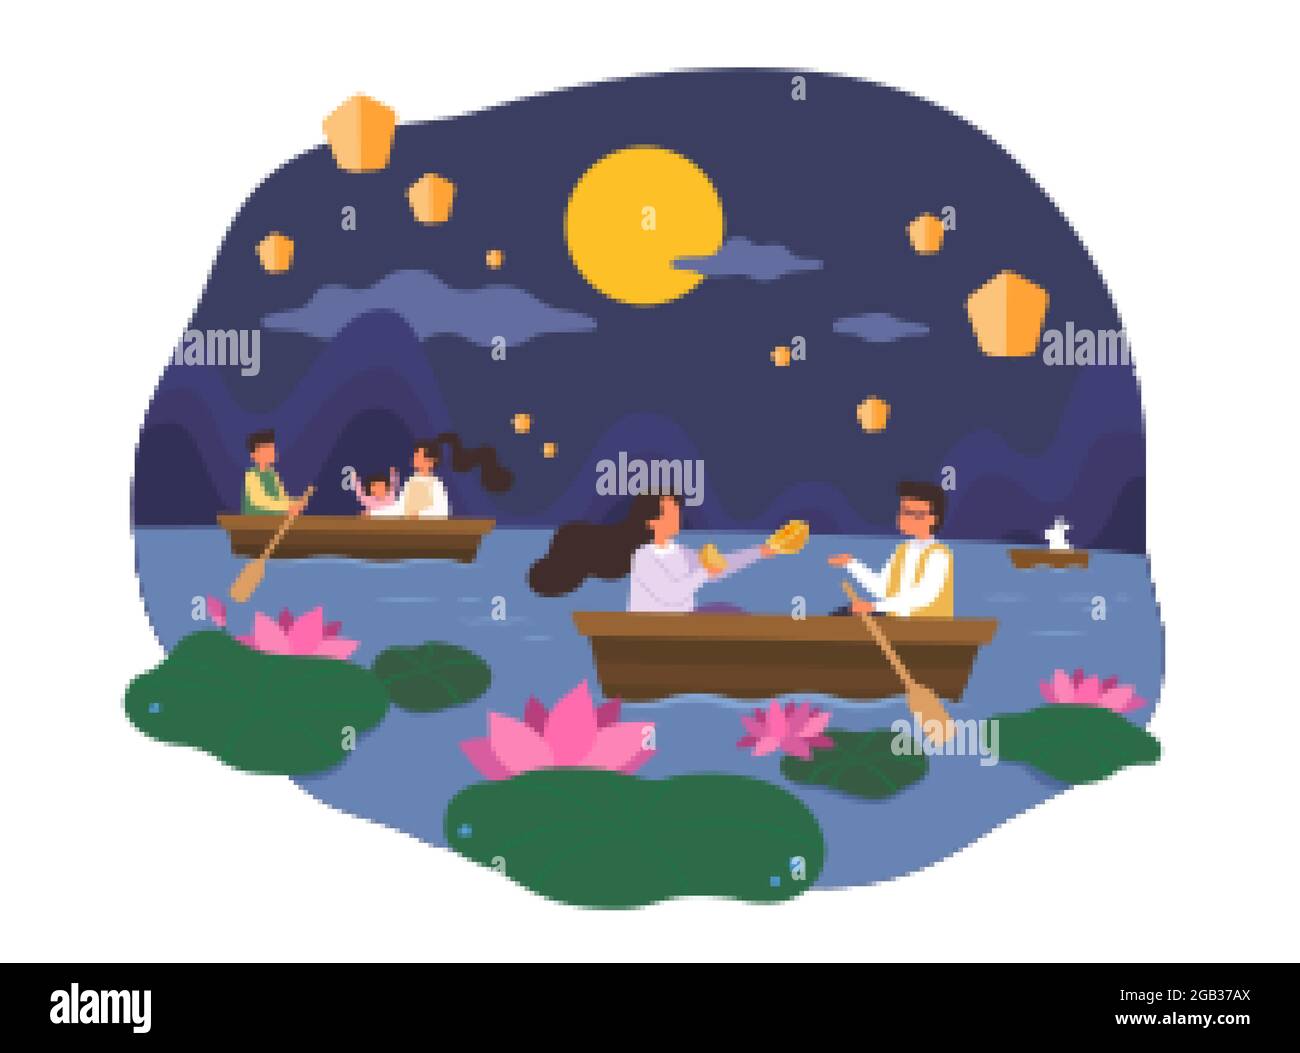 Mid autumn festival night. Flat illustration of people rowing boat on a calm lake at night with lanterns flying in sky Stock Vector